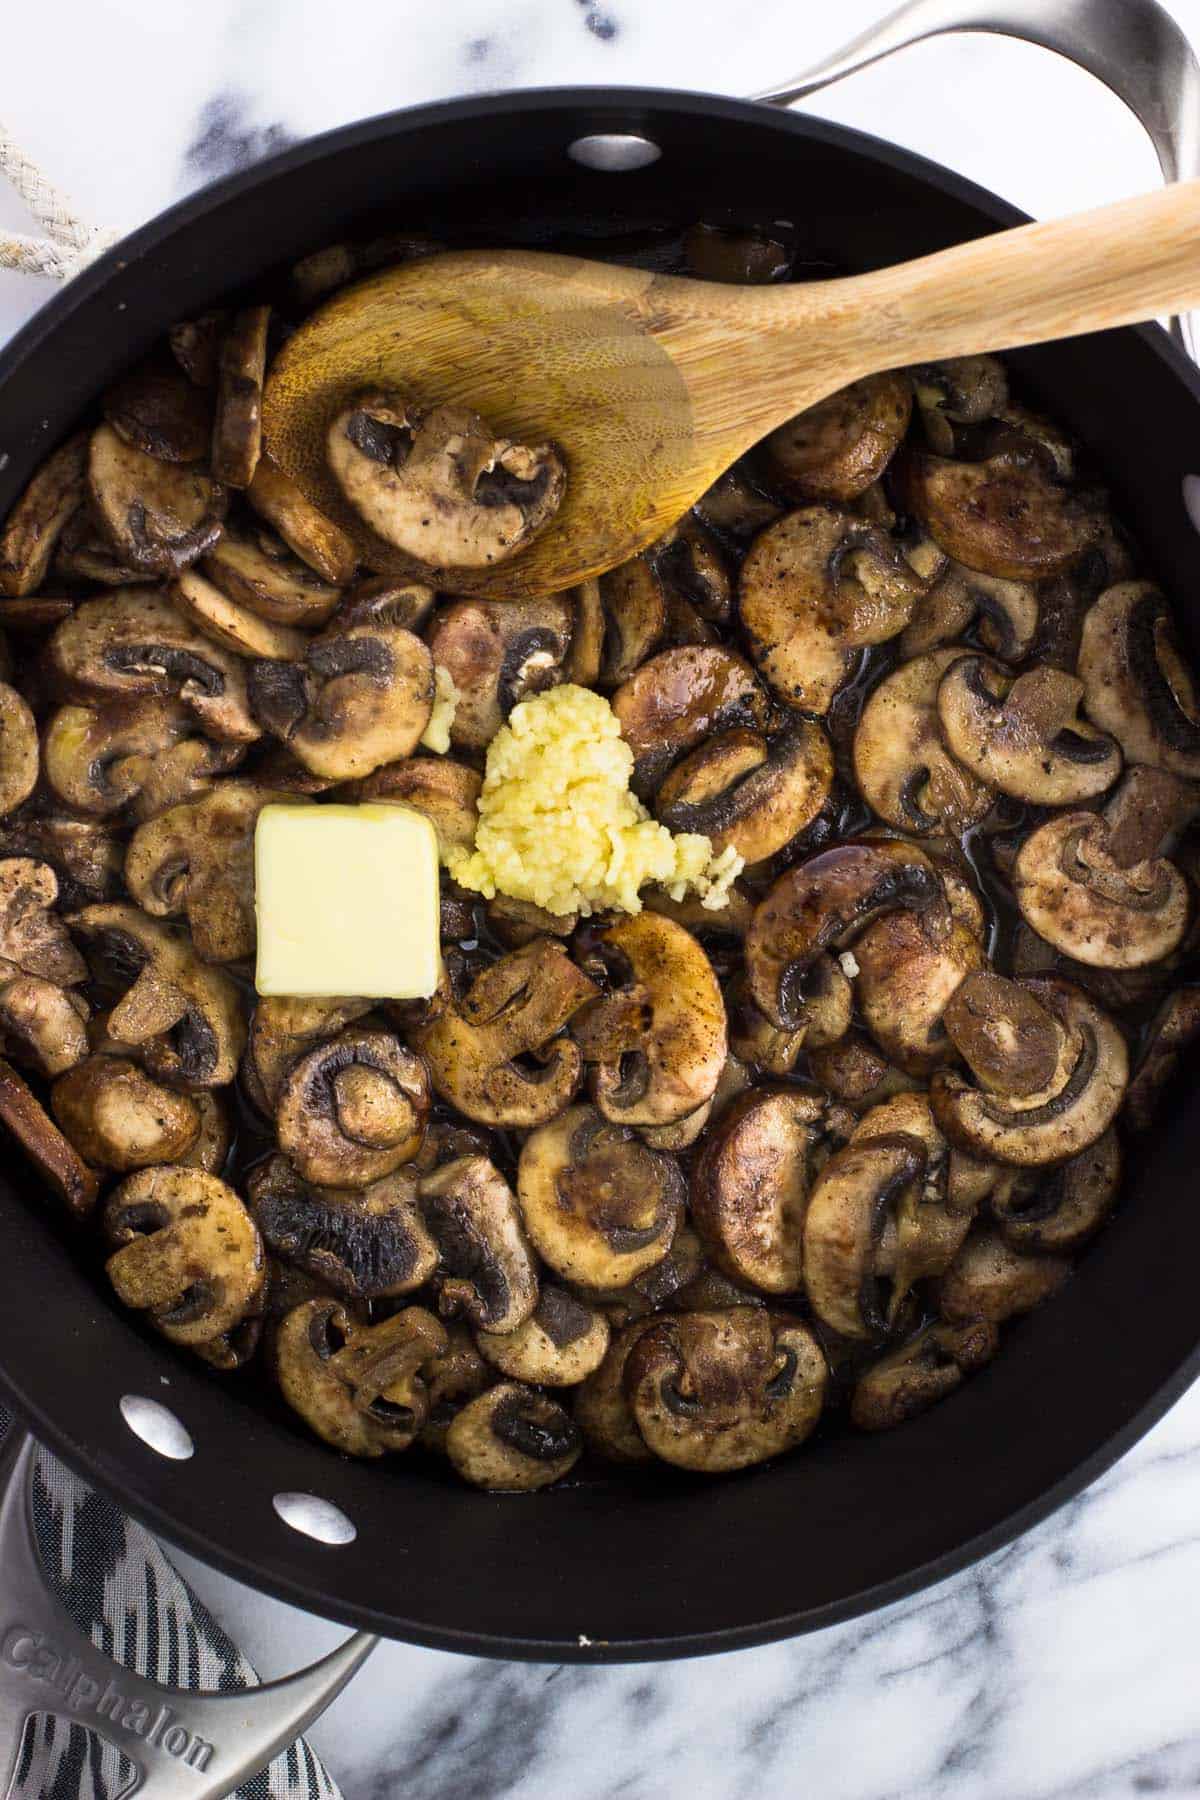 Butter and garlic added to the mushrooms in a pan.